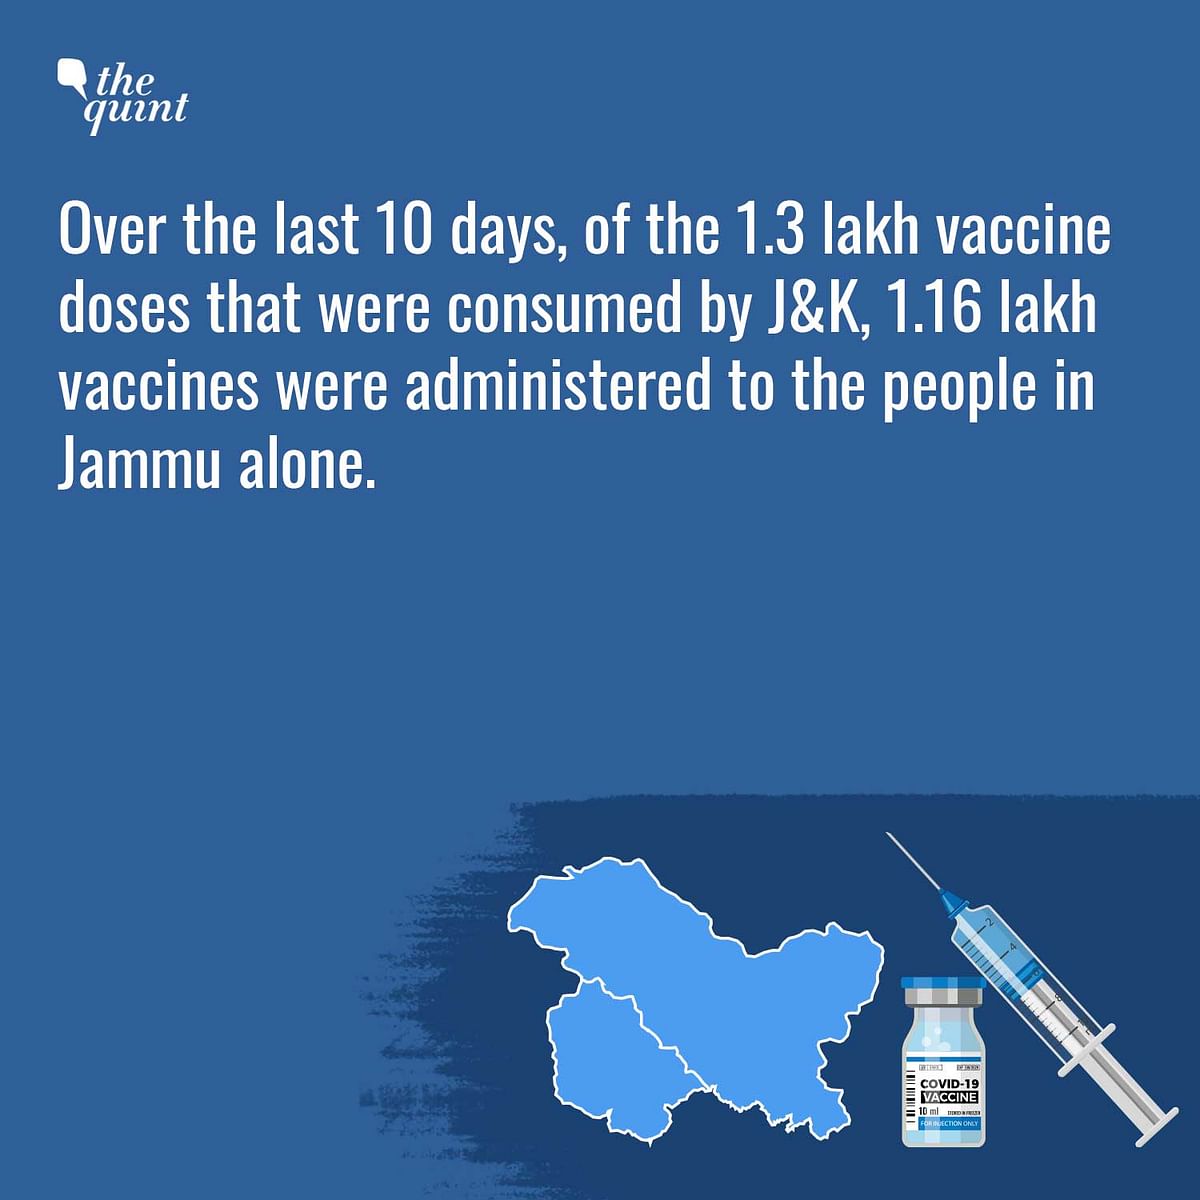 In 10 days, of 1.3 lakh vaccine doses consumed by J&K, 1.16 lakh vaccines were administered to Jammu alone.